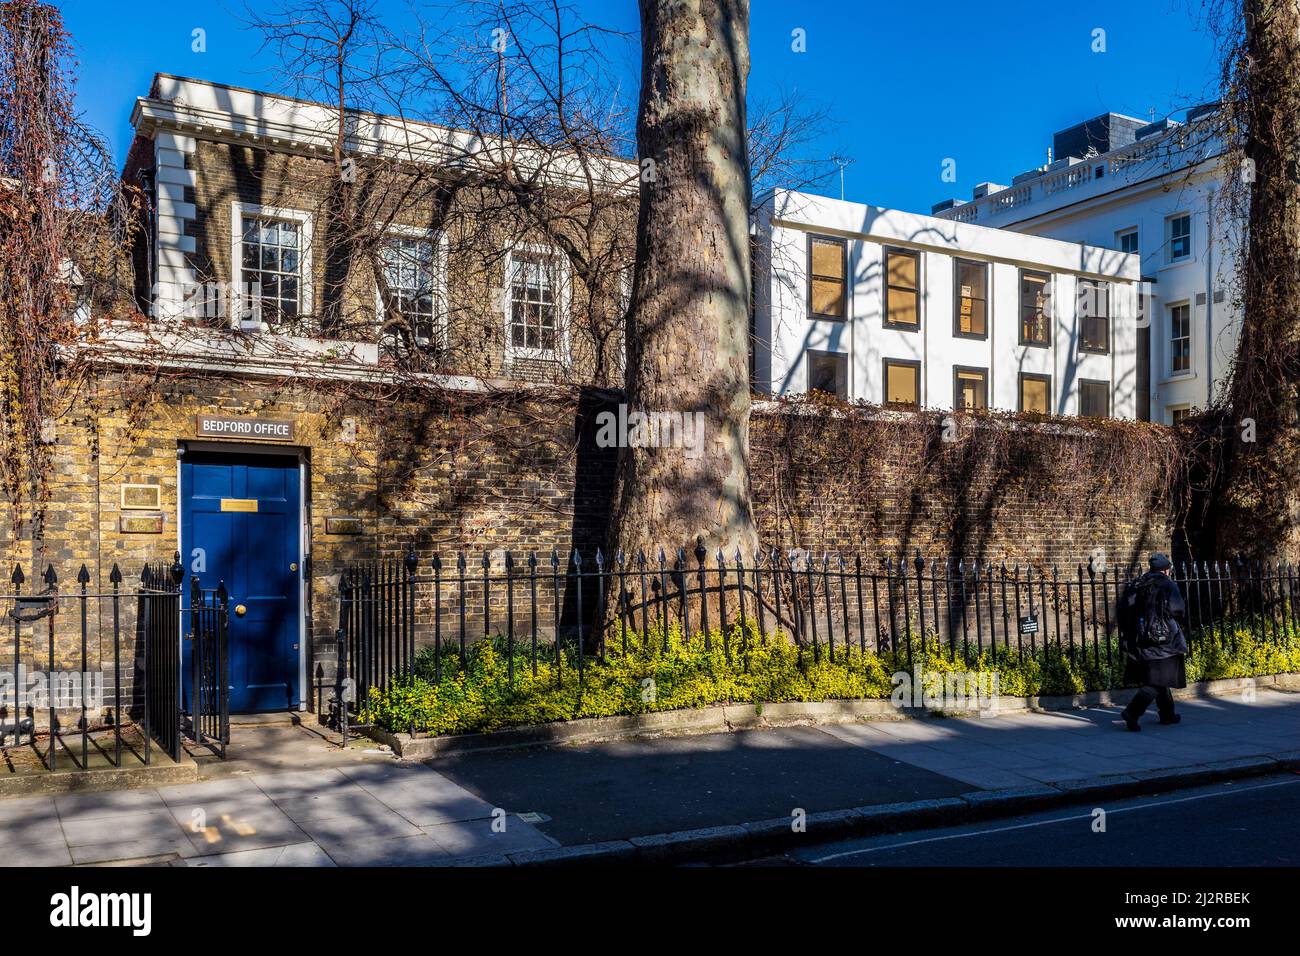 The Bedford Estate London - the entrance to the Bedford Estates Office. The company is the largest private land owner in Bloomsbury, Central London. Stock Photo